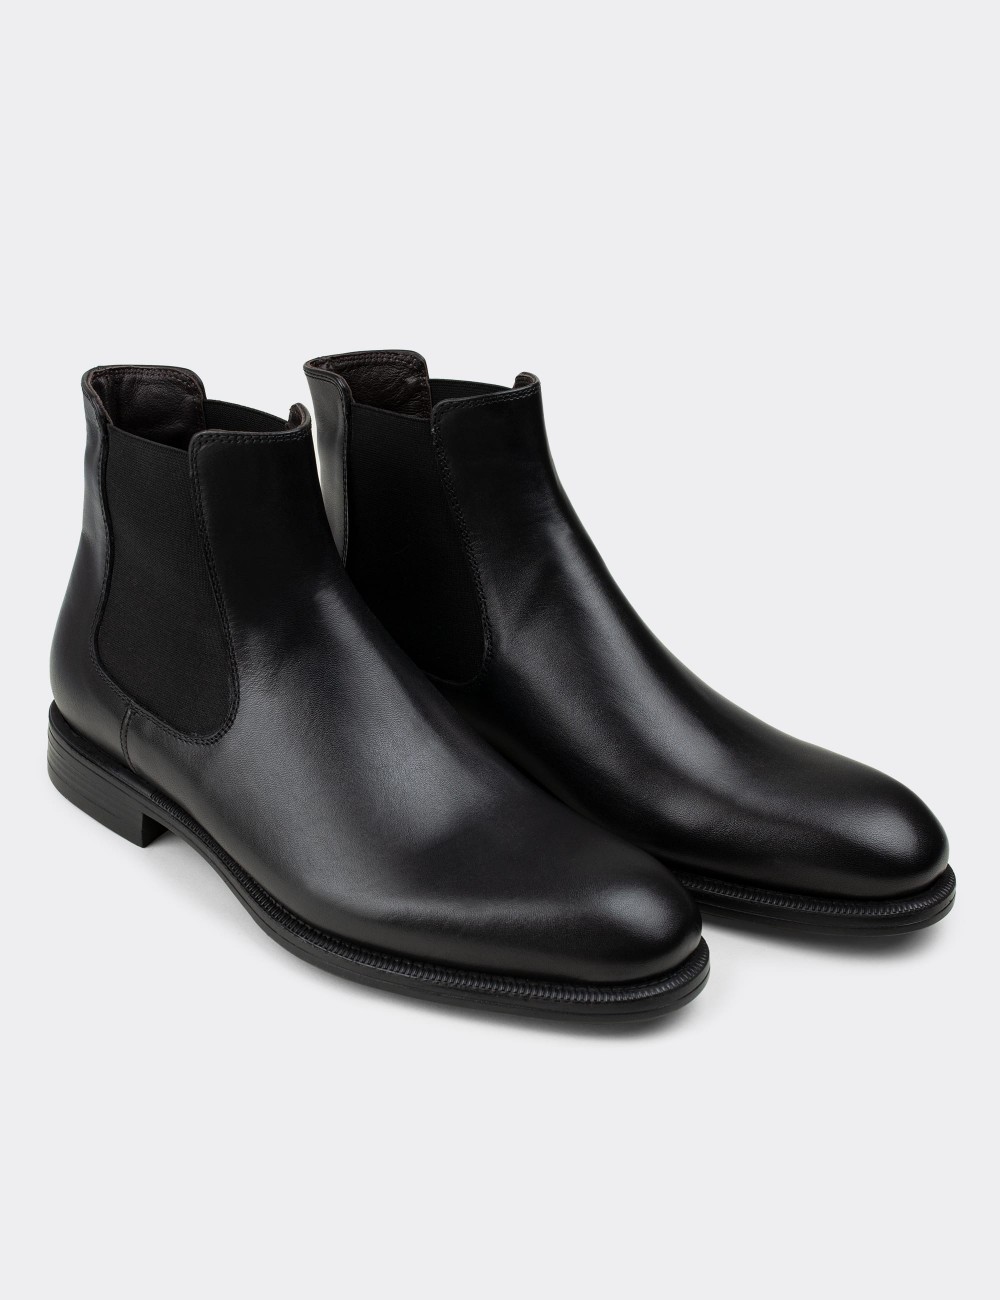 Black  Leather Chelsea Boots - 01849MSYHC01